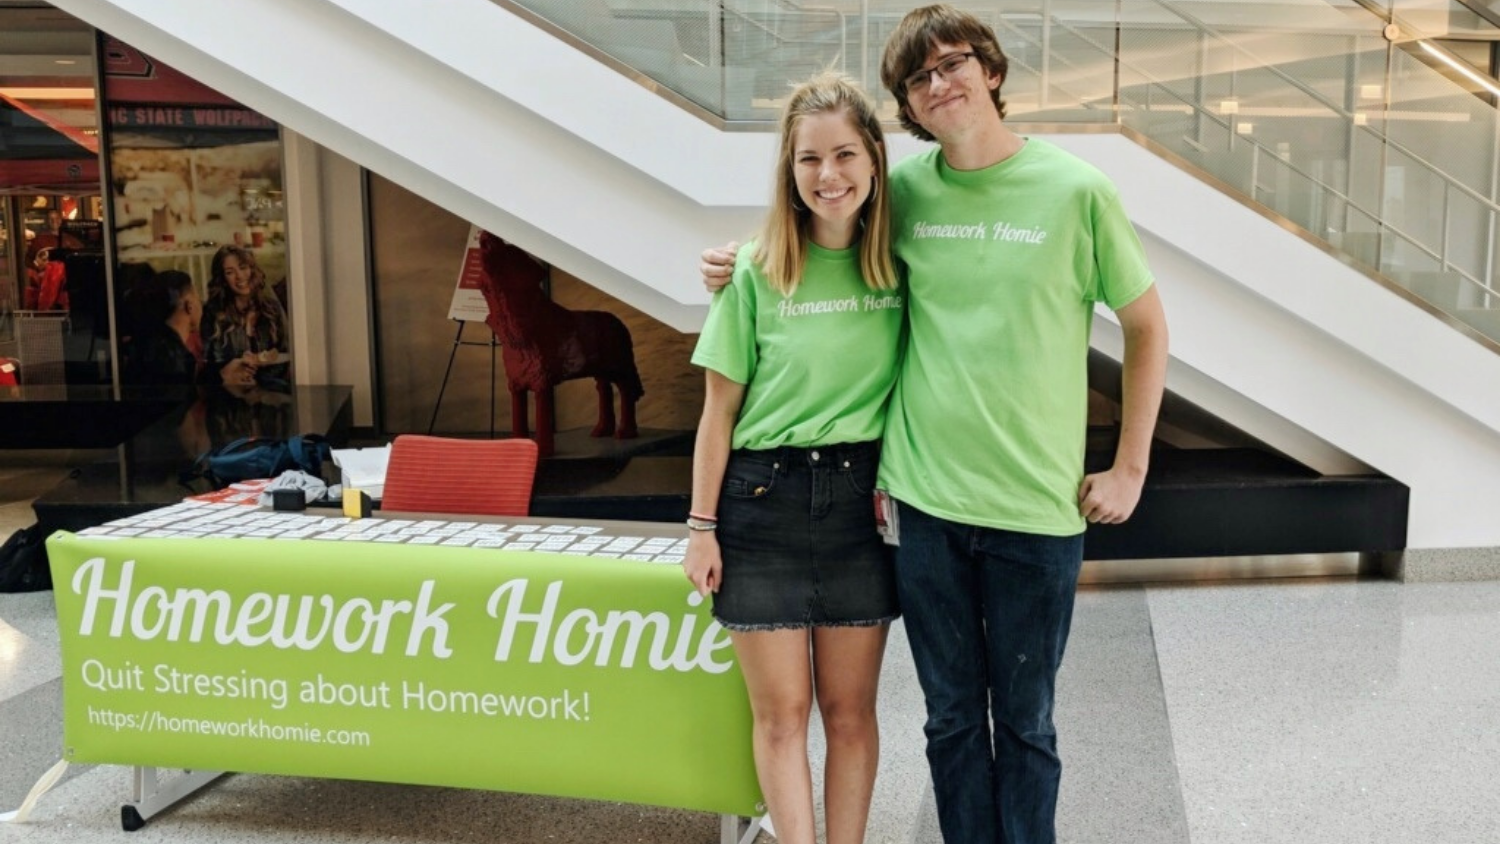 Sam Weaver and co-founder Meg Grant promoting Homework Homie at Talley Student Union